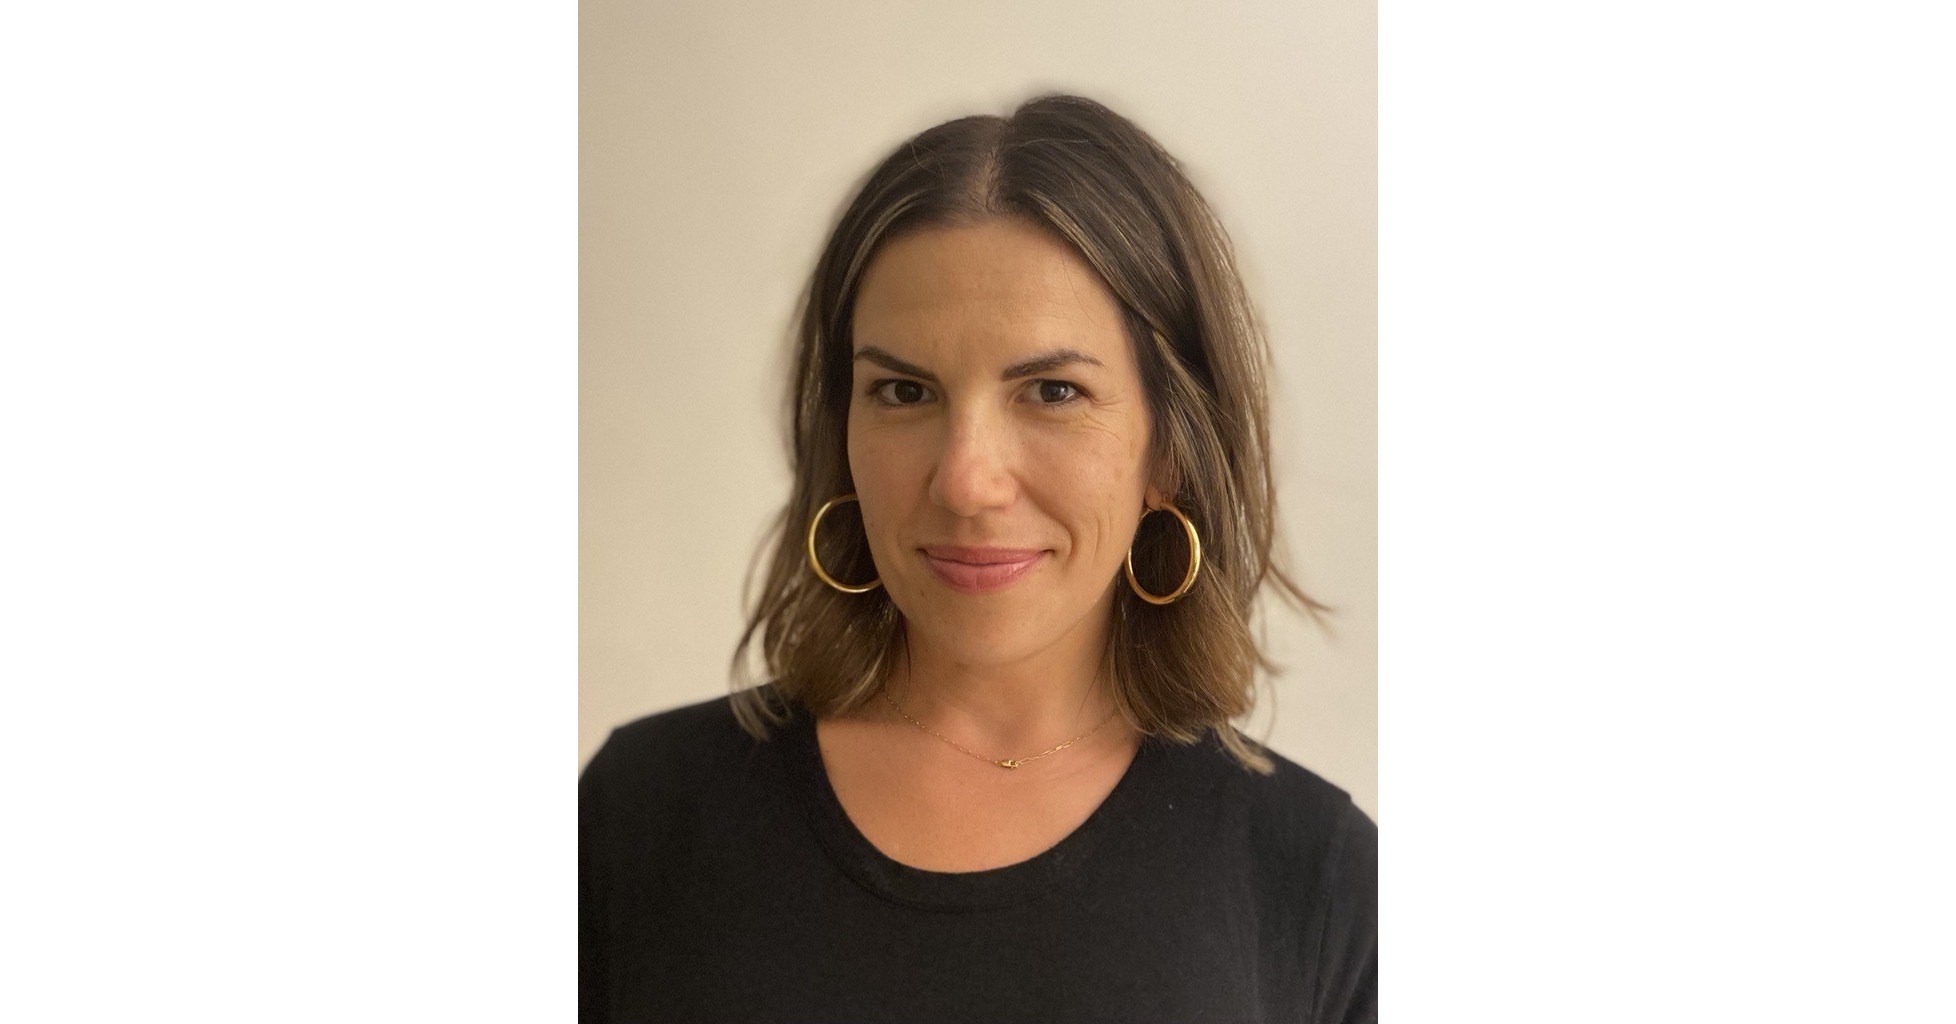 HANNA ANDERSSON APPOINTS CALLIE CANFIELD AS CHIEF BRAND OFFICER